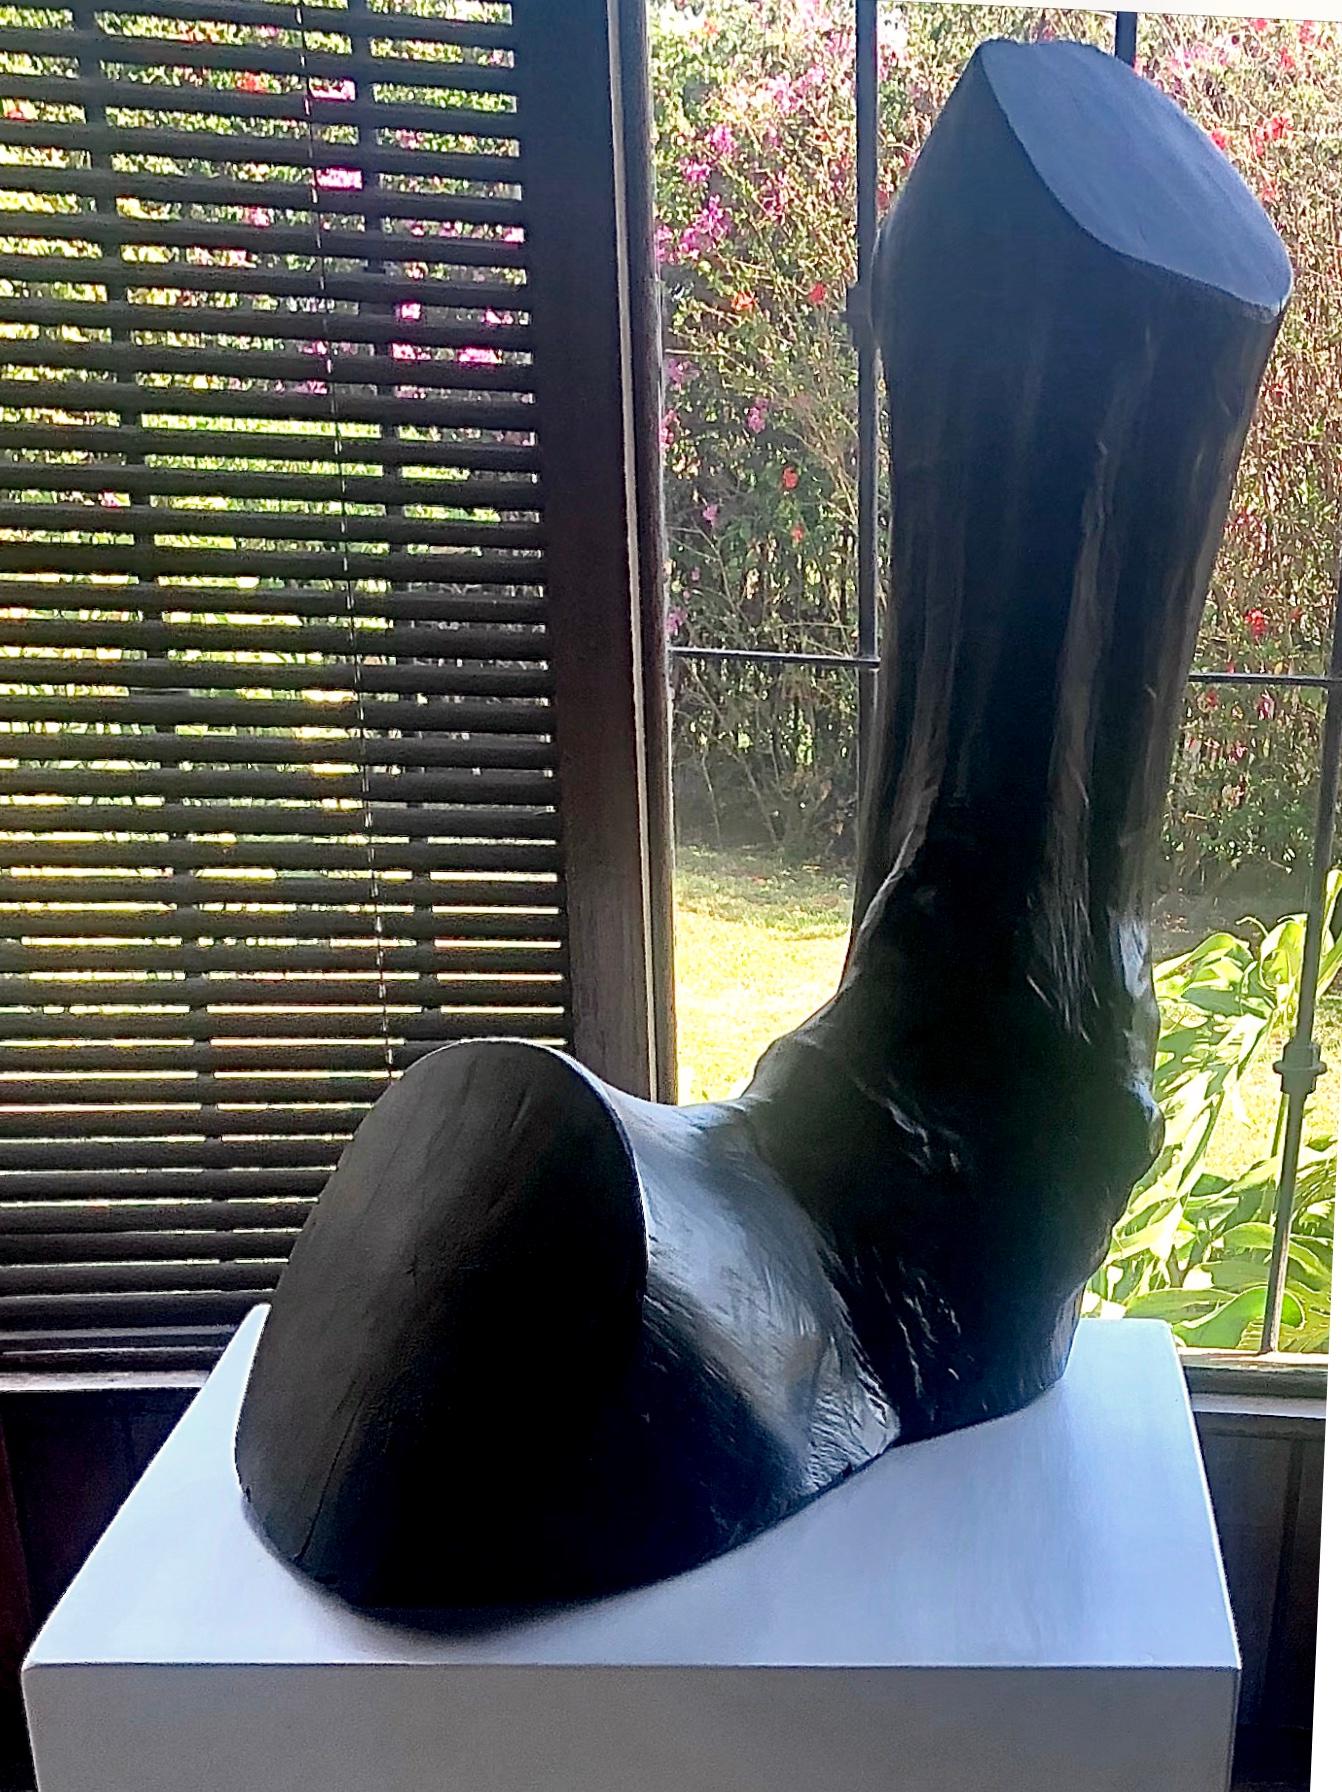 Eugenio Leal  Figurative Sculpture - “Pata Negra” 2019, Sculpture in Walnut Wood and Lacquer Paint 